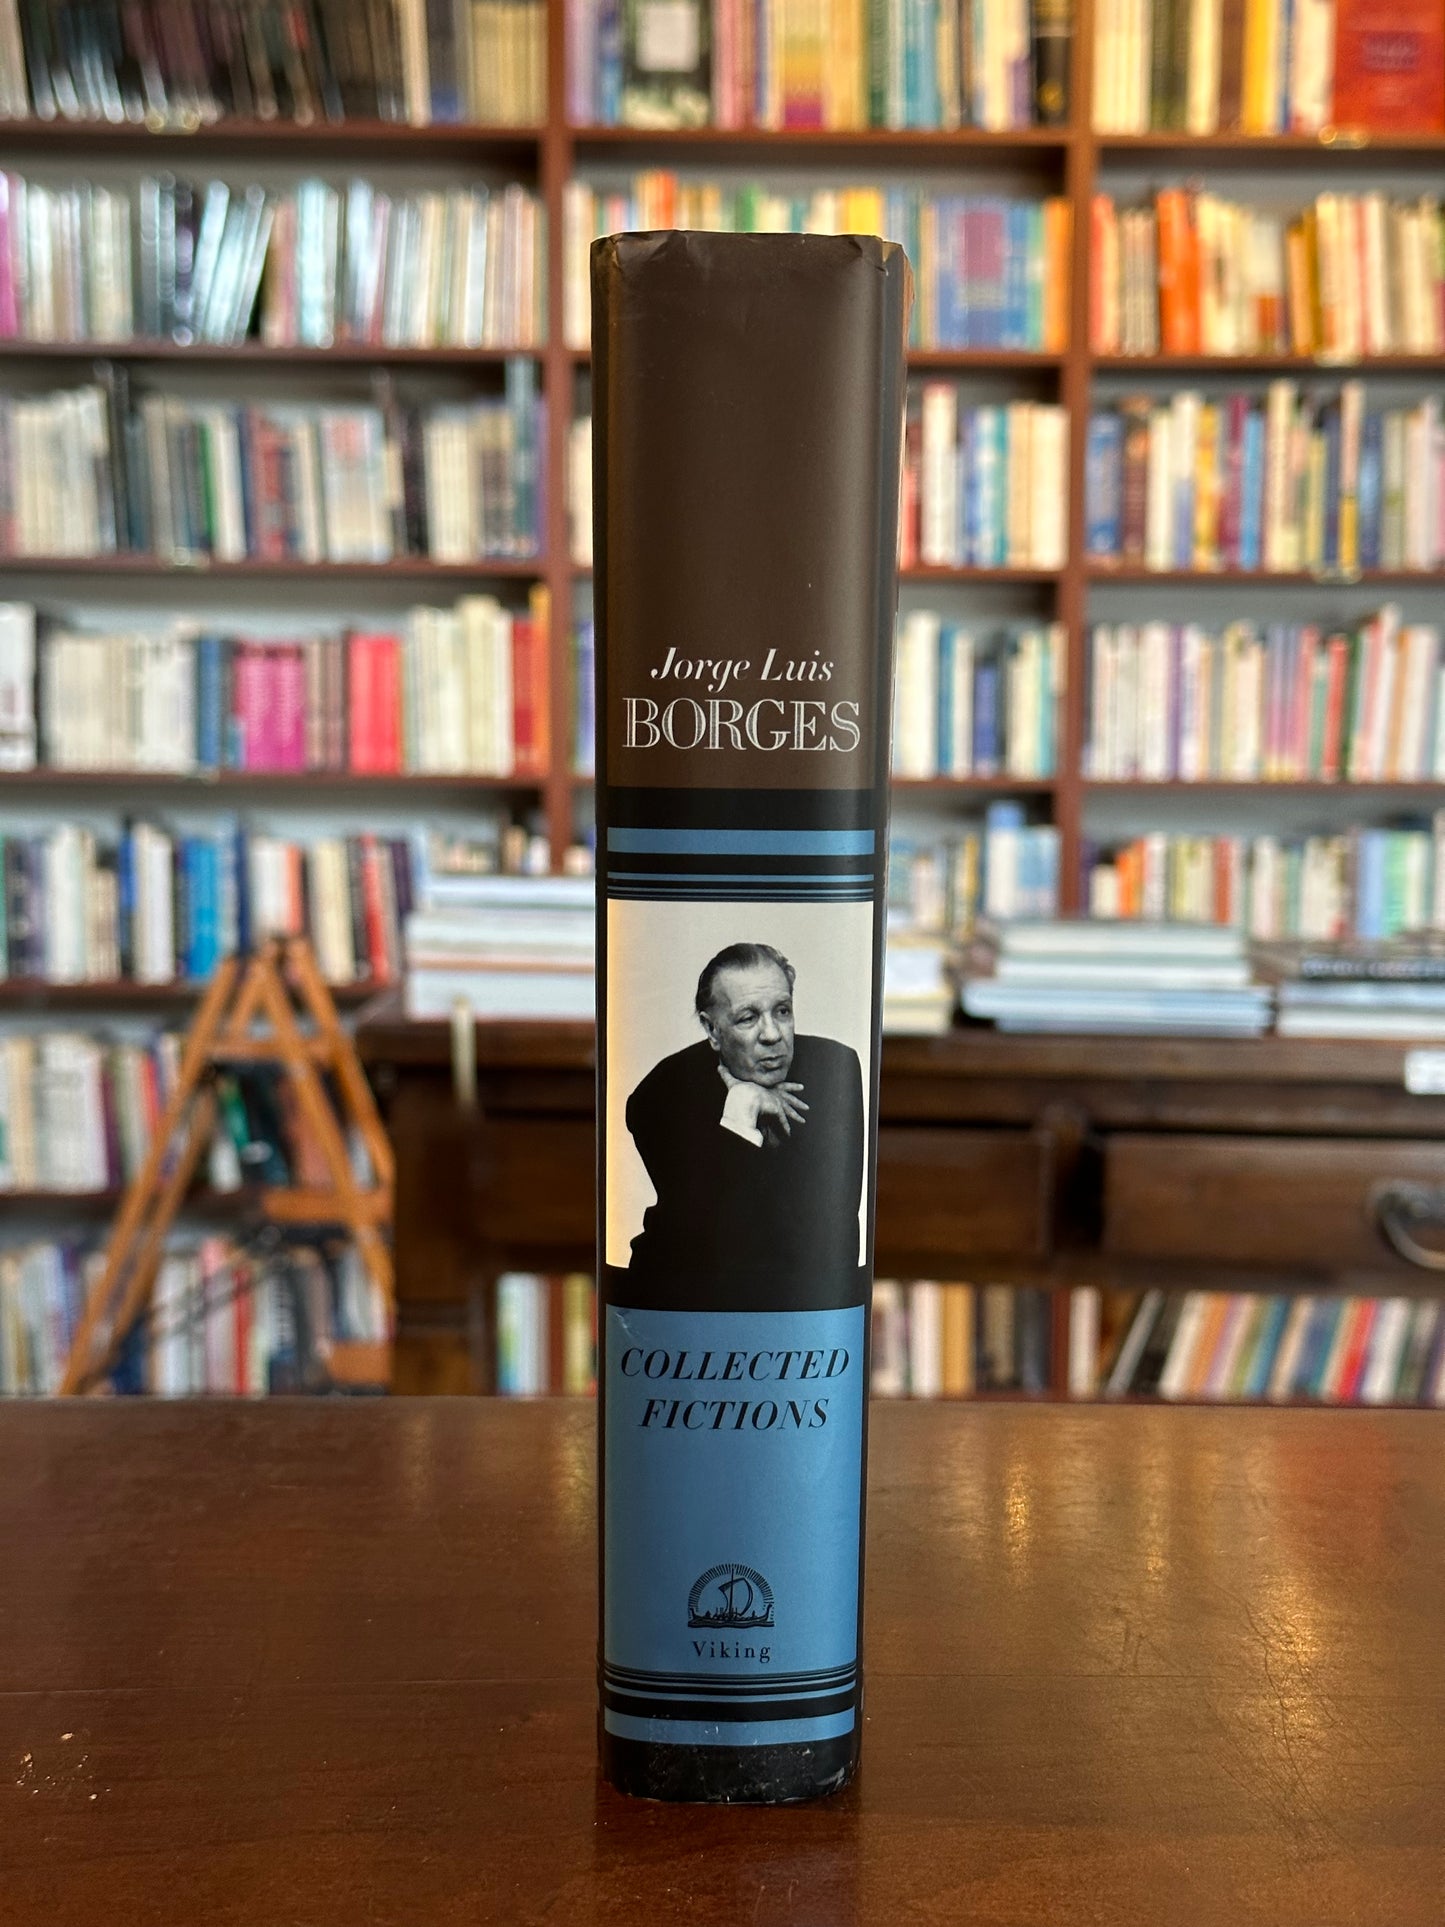 Collected Fictions by Jorge Louis Borges